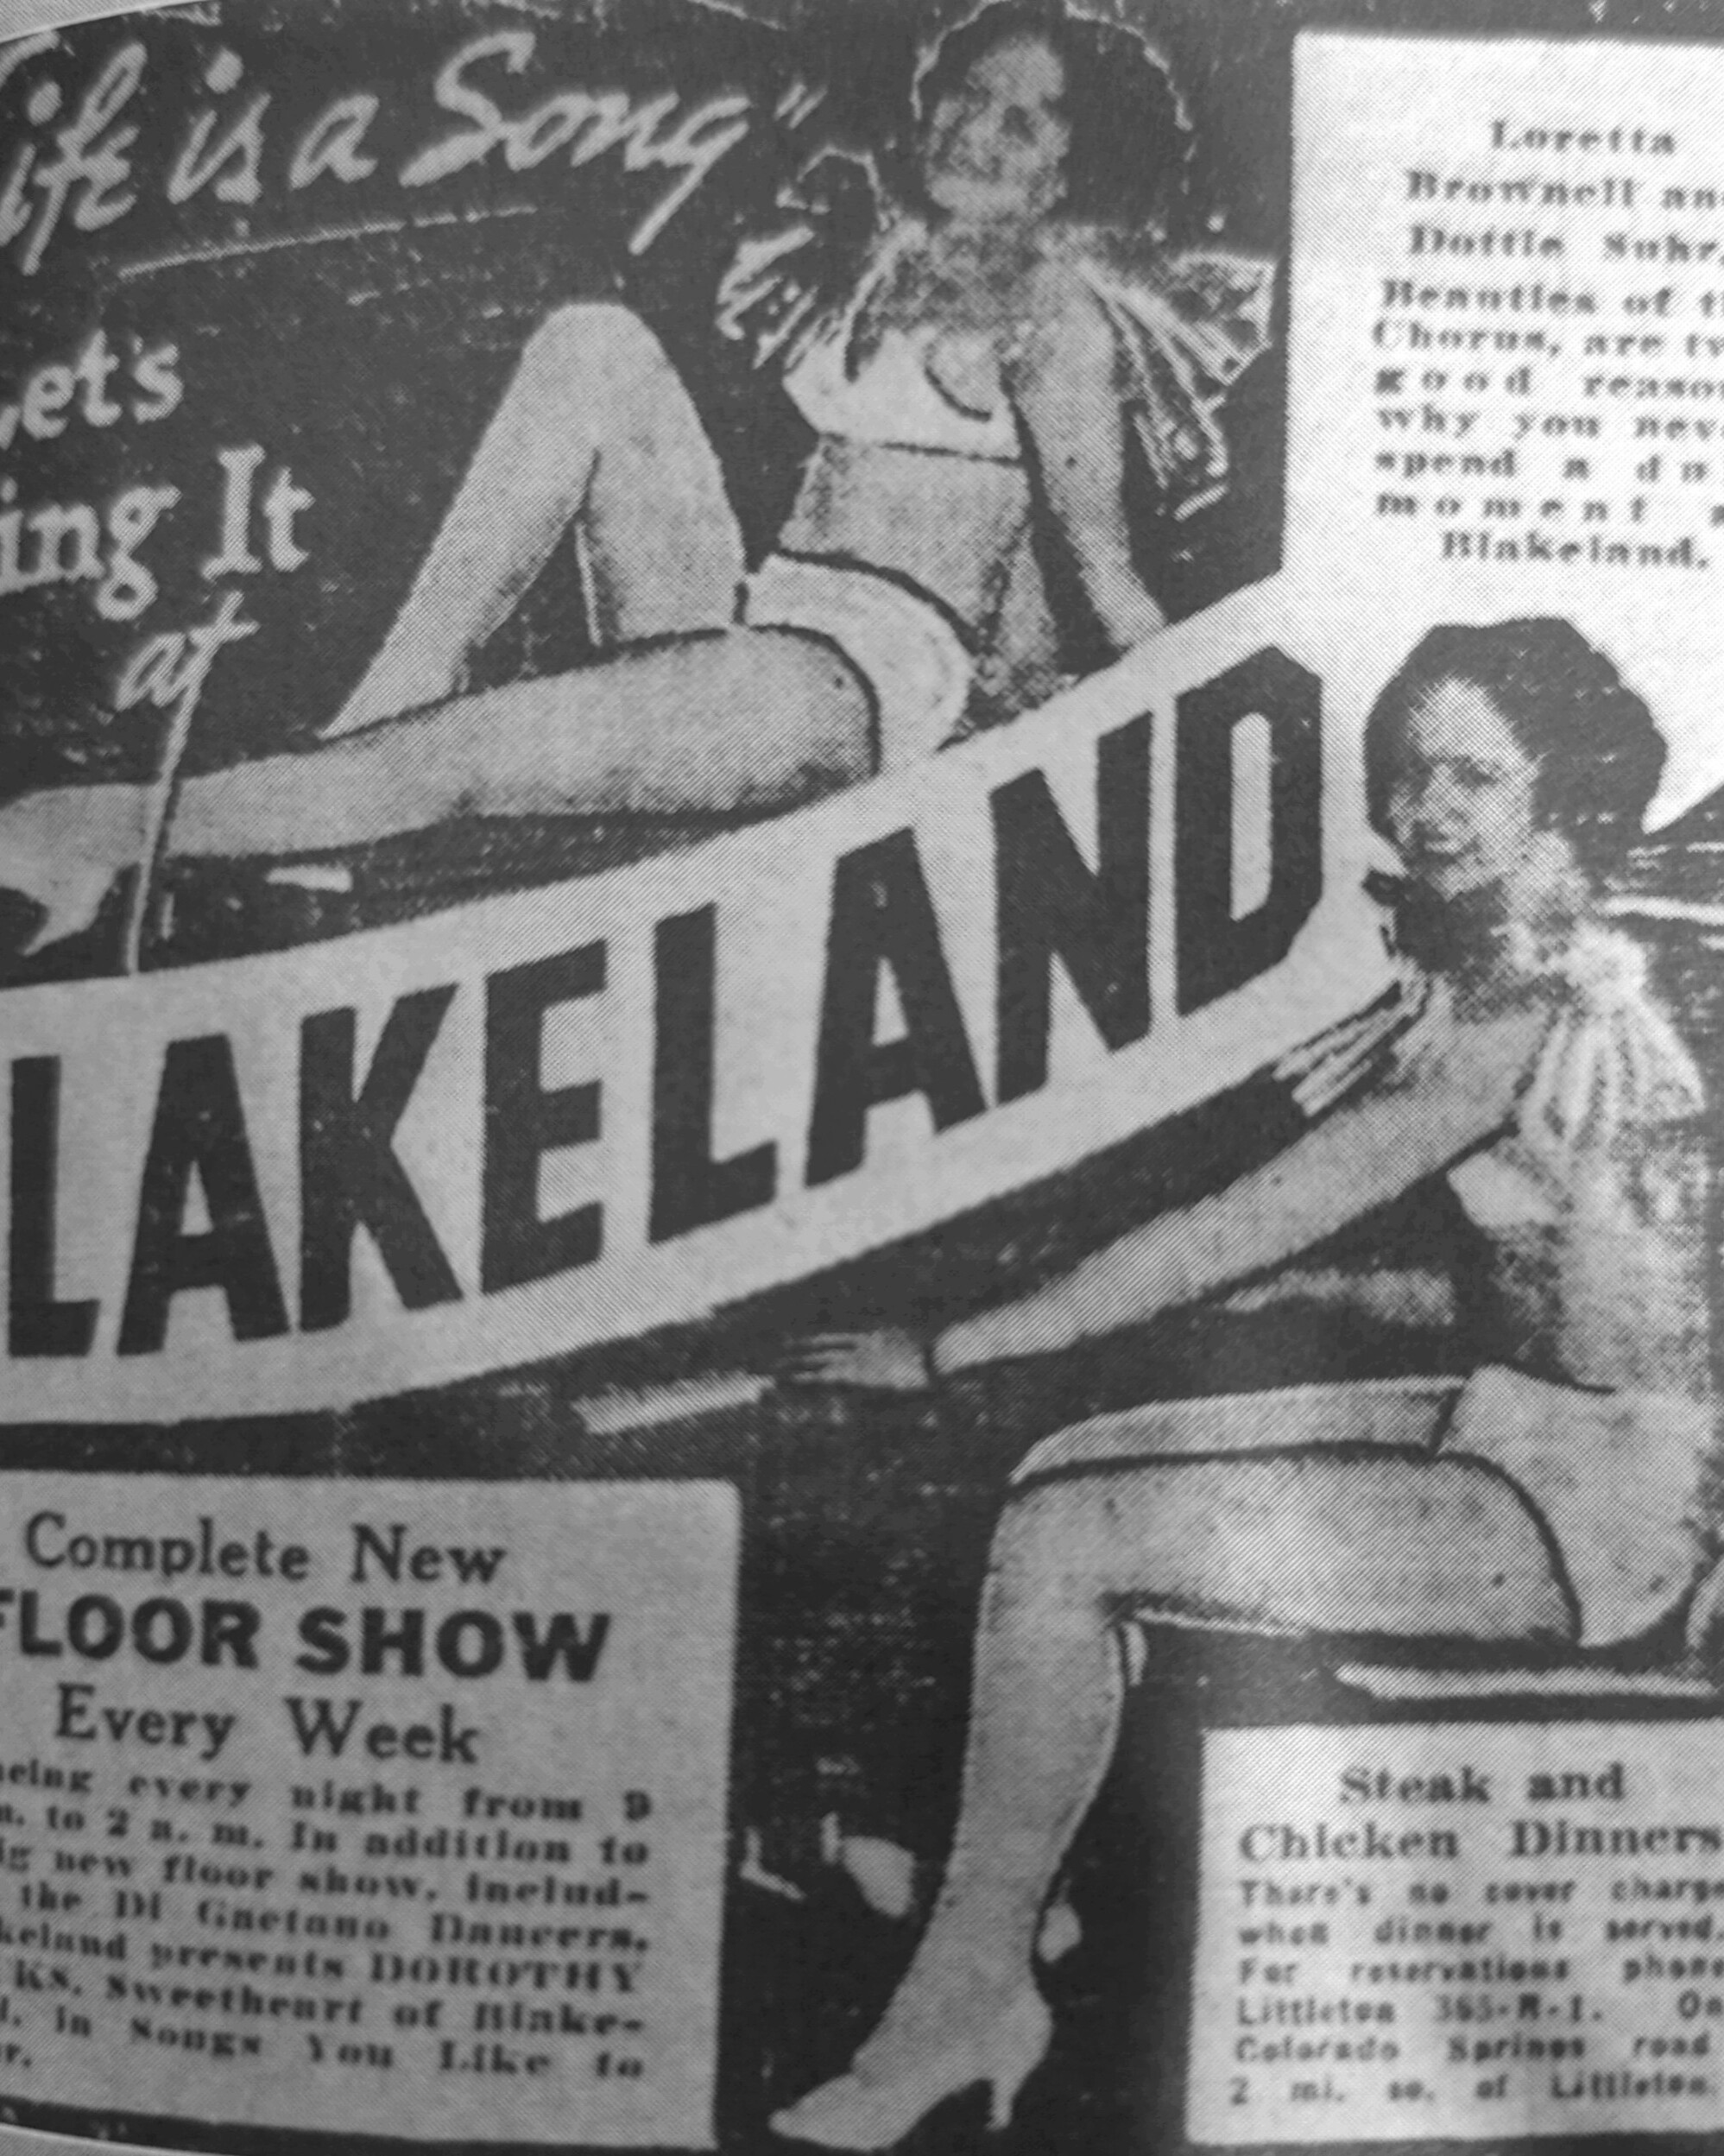 An Ad for the Blakeland Inn in the 1930s. The Smaldone Brothers partnered with 